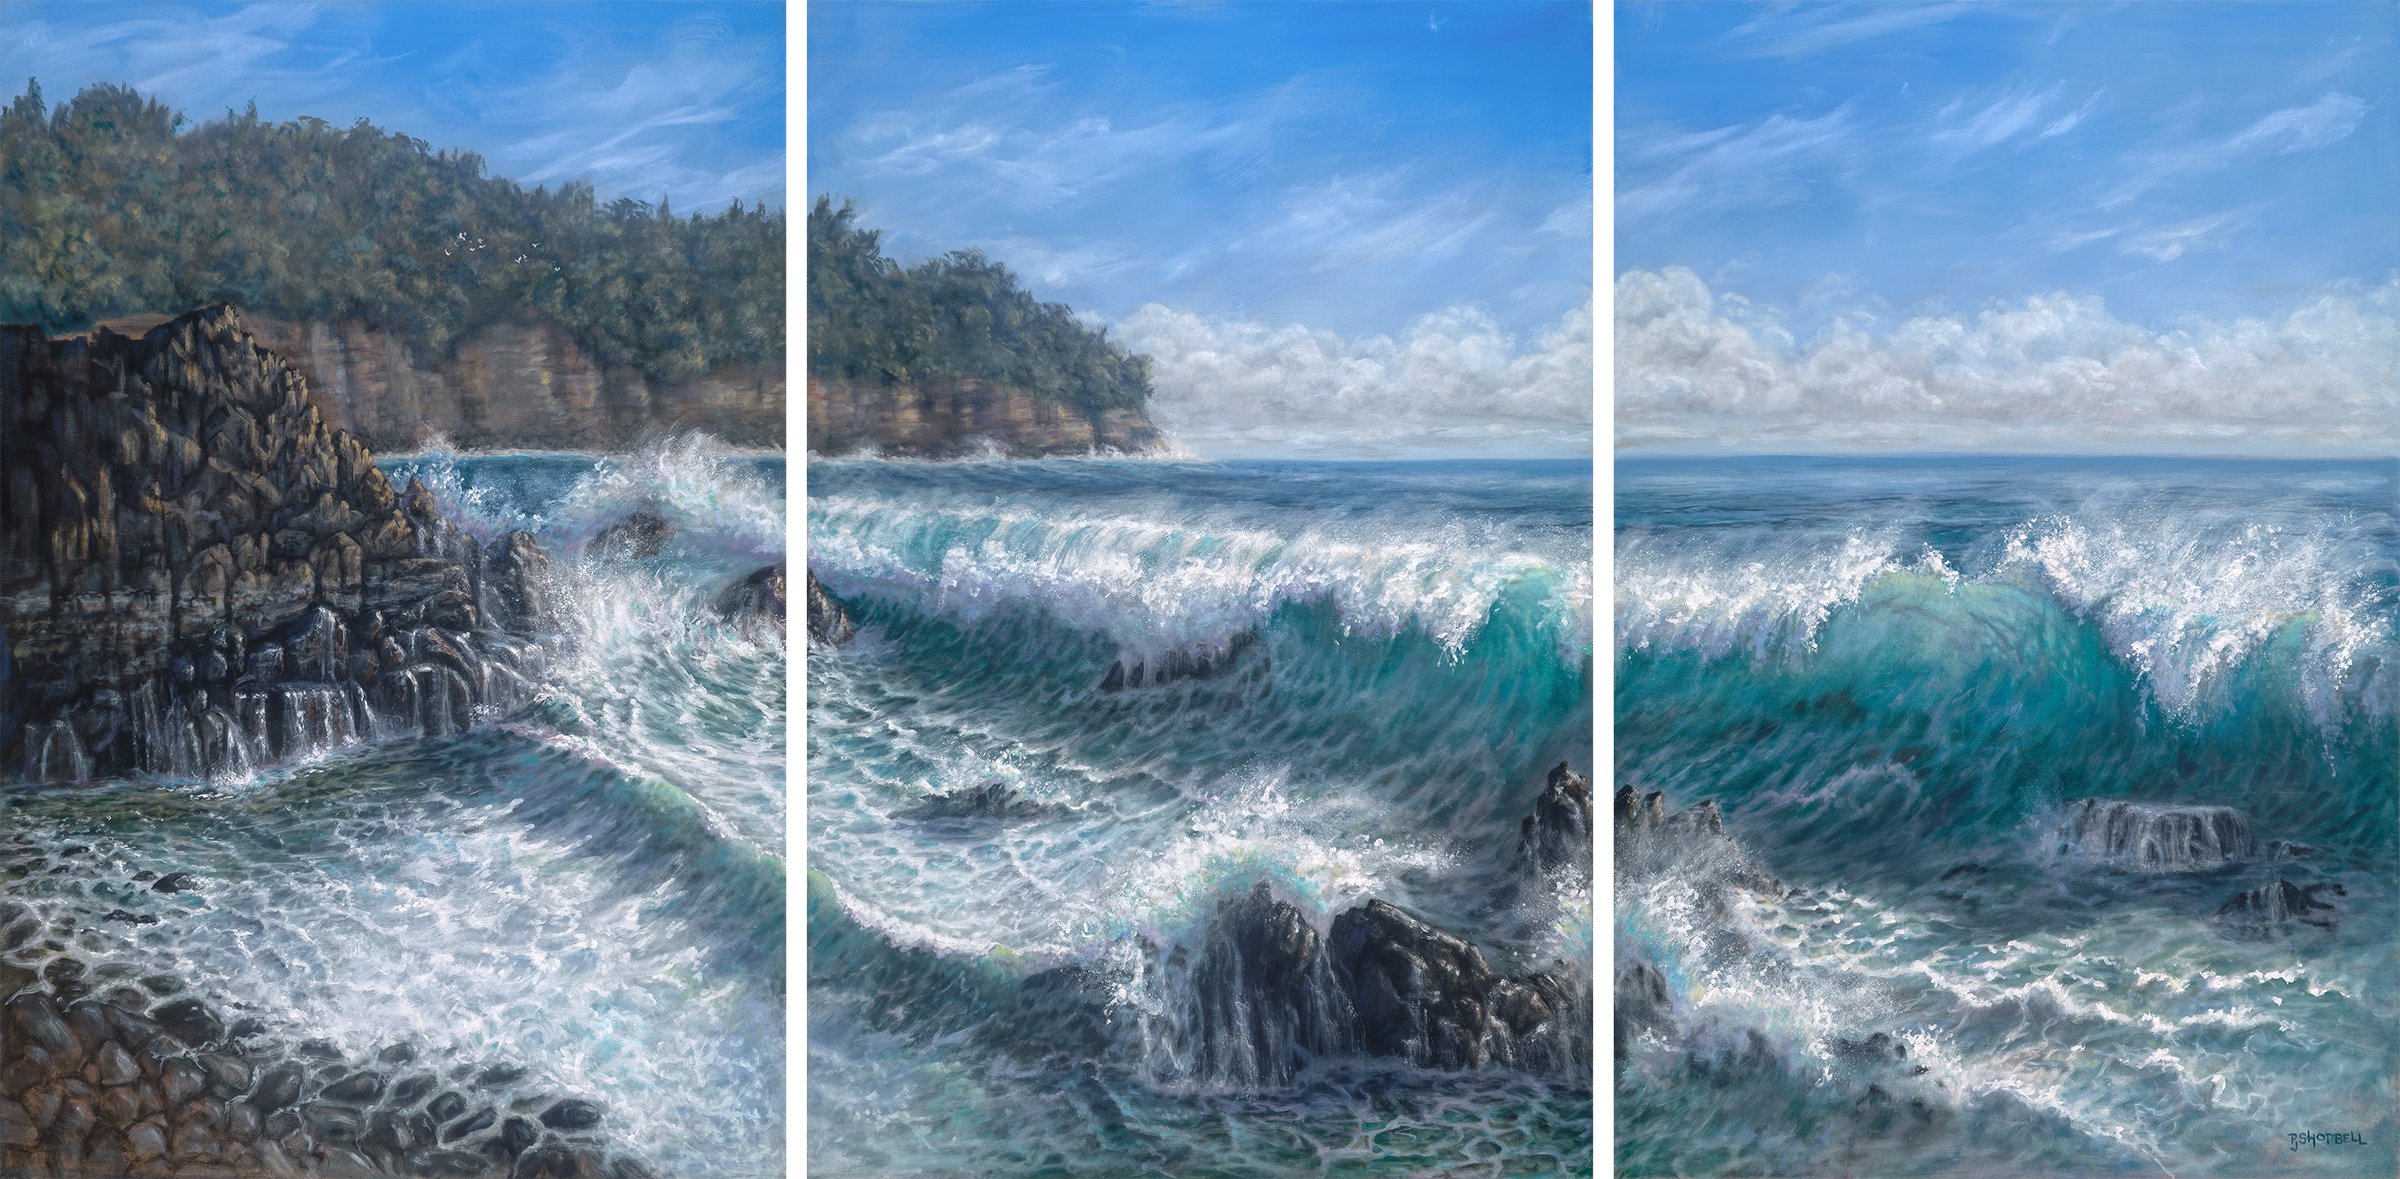 Laupahoehoe point triptych snv9ic qgc247